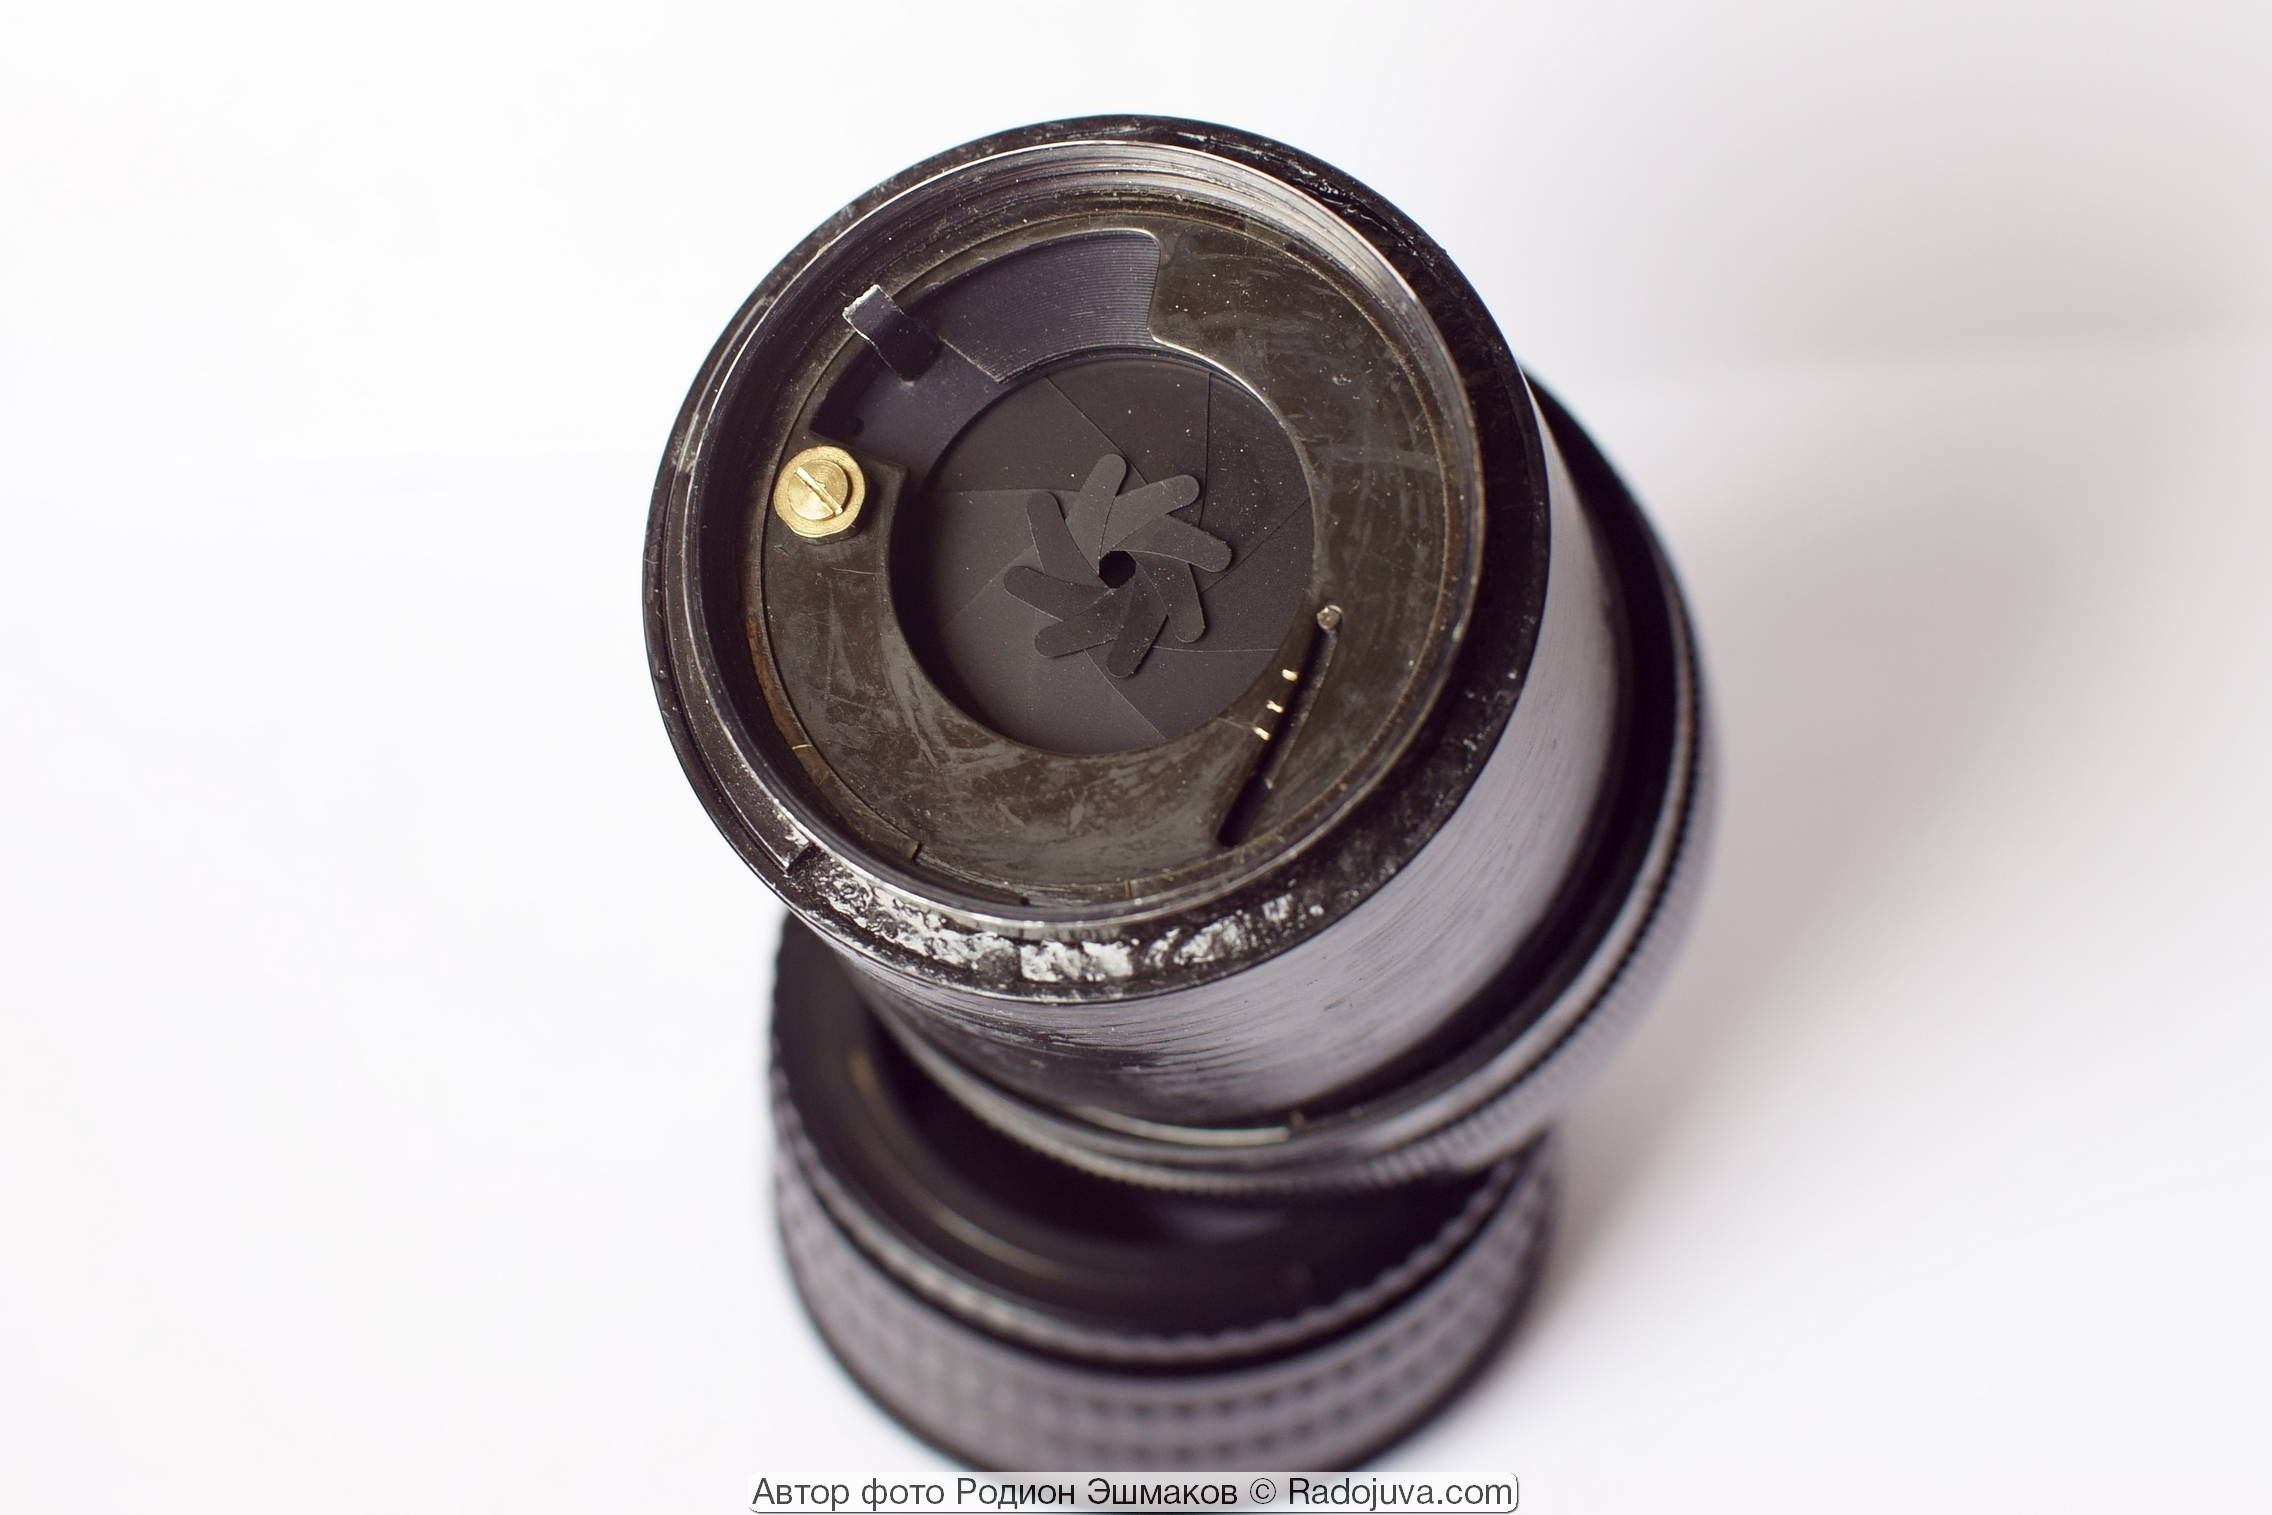 Unusual pre-lens aperture of the adapted lens.